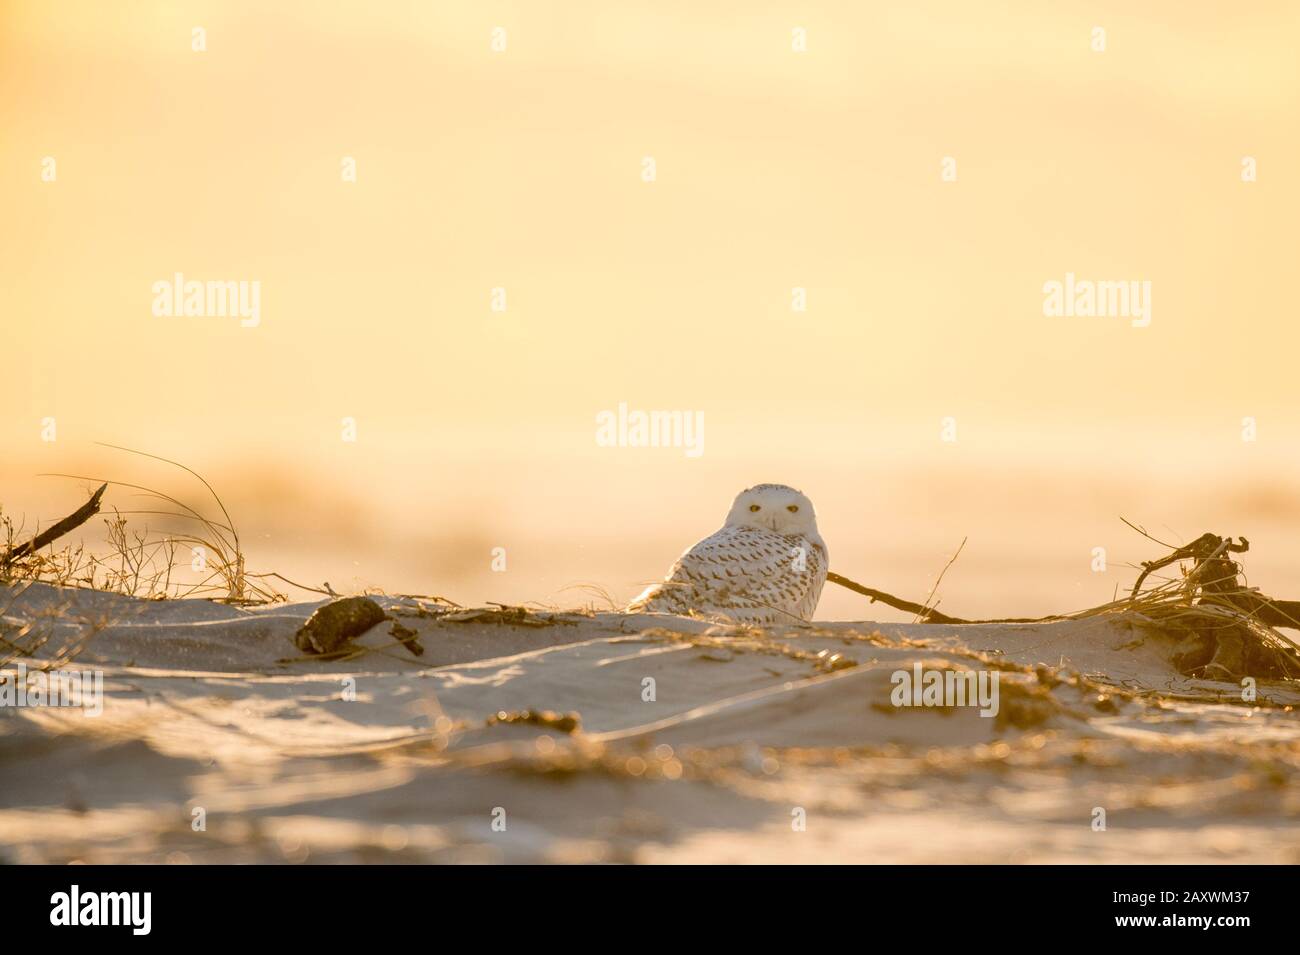 A Snowy Owl sitting on a small hill of sand on an open beach as it glows in the bright setting sunlight. Stock Photo